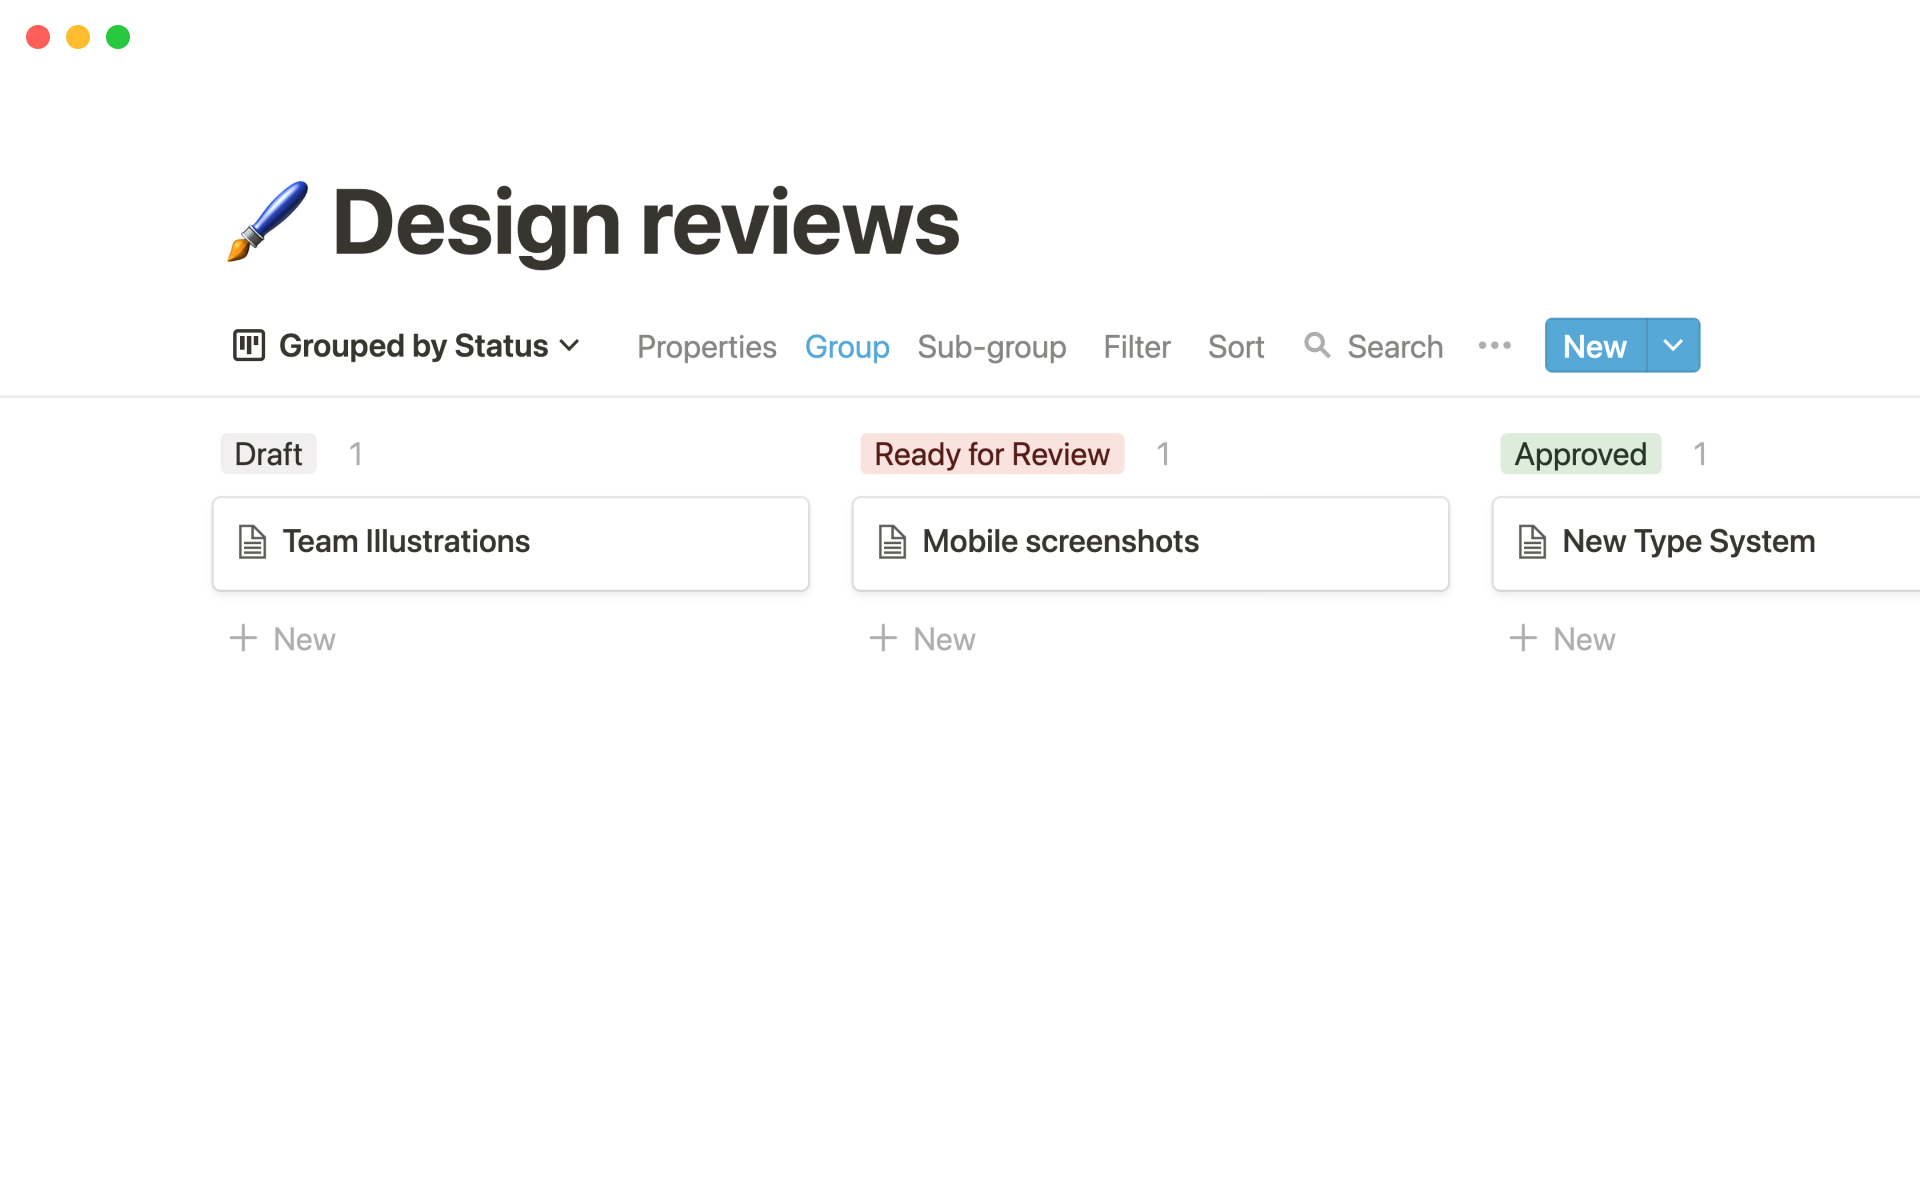 View design projects as a list or grouped by status.